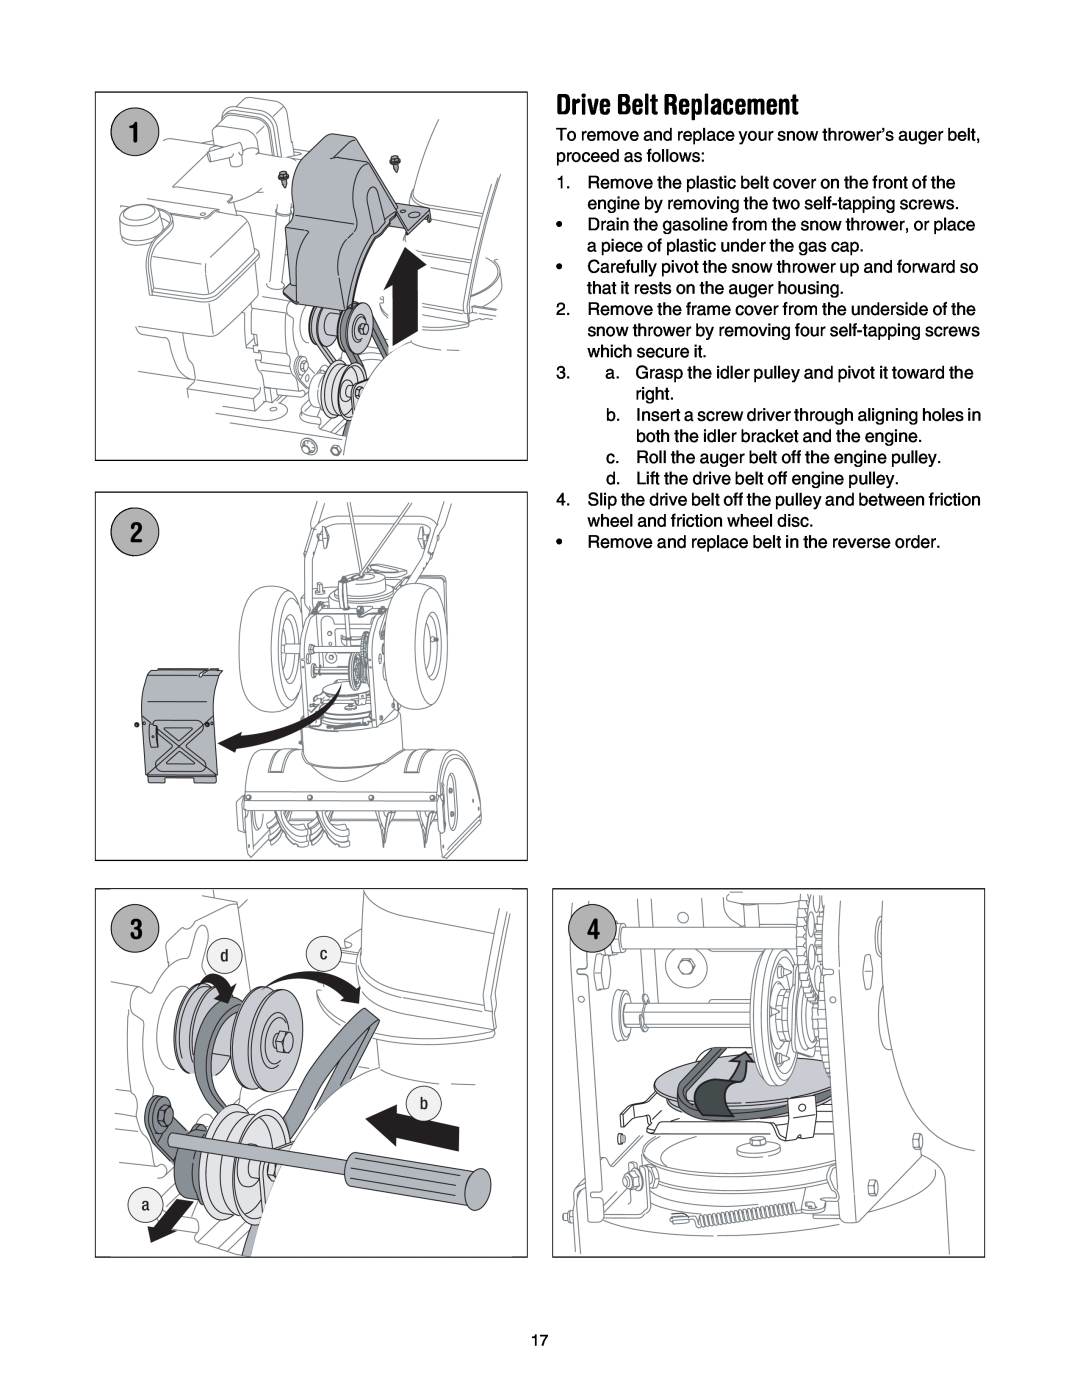 MTD L-Style manual Drive Belt Replacement 